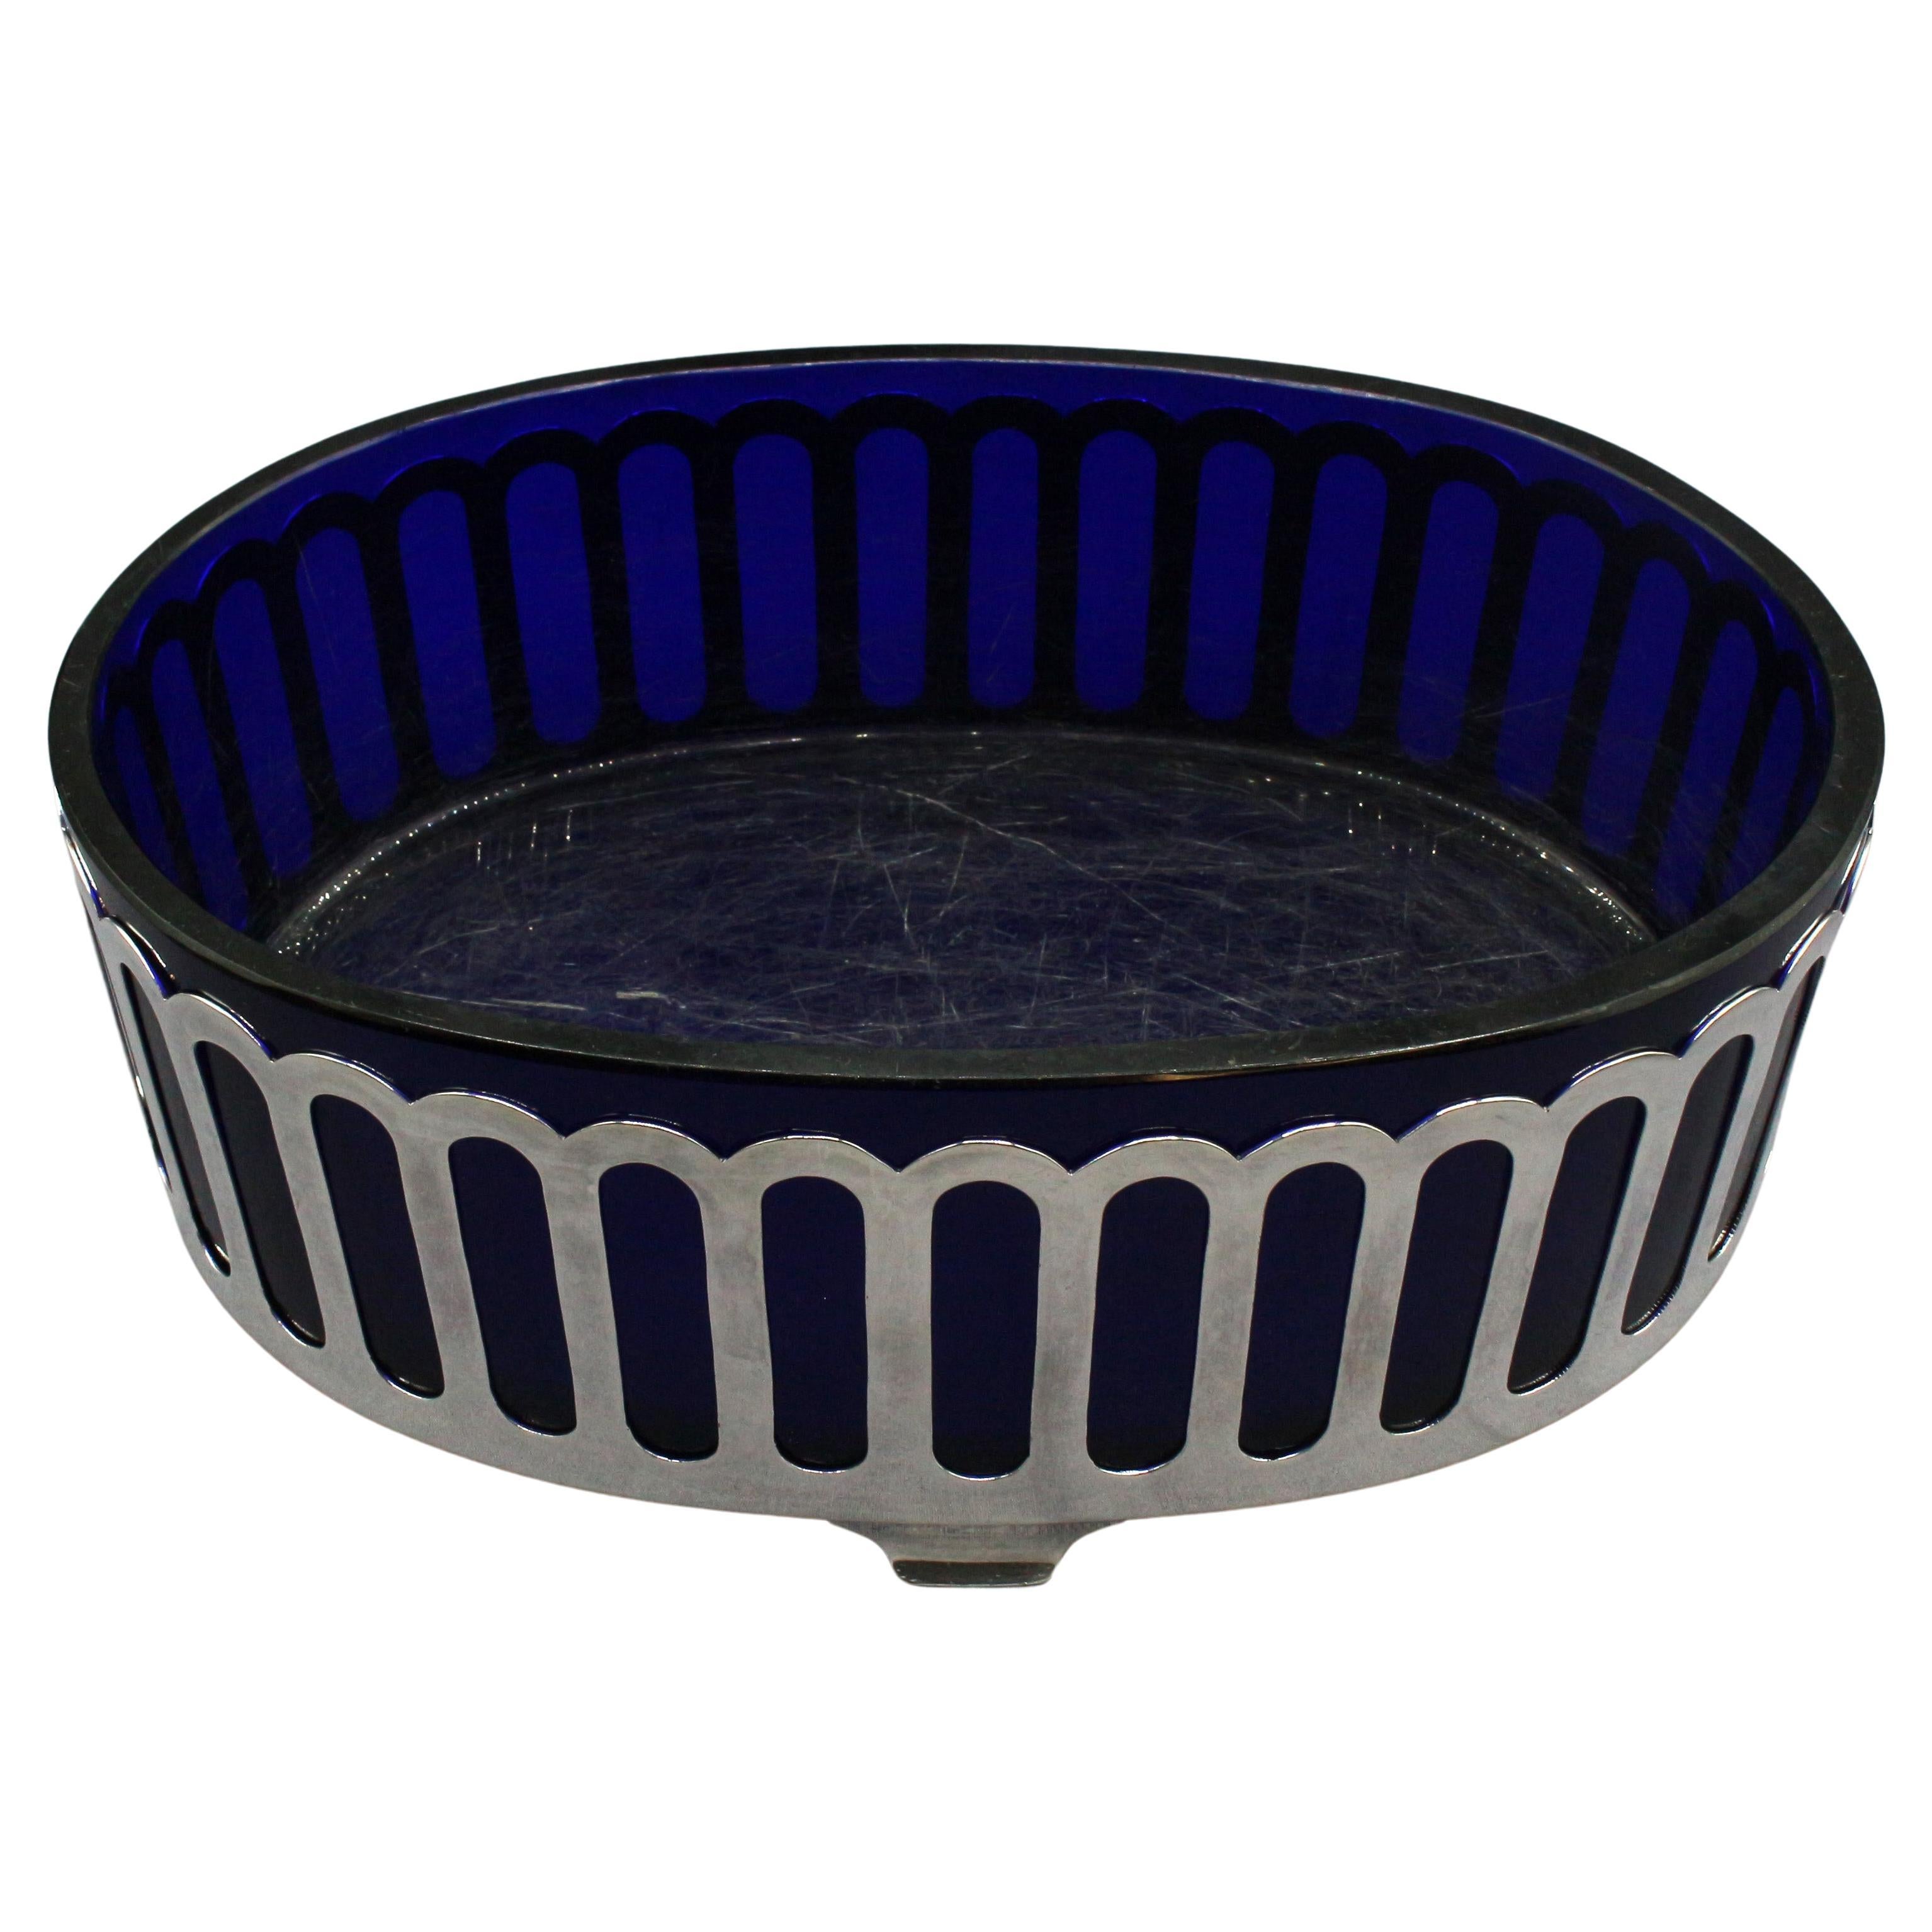 c. 1930s Art Deco Cobalt Glass & Silver Plated Serving Dish For Sale